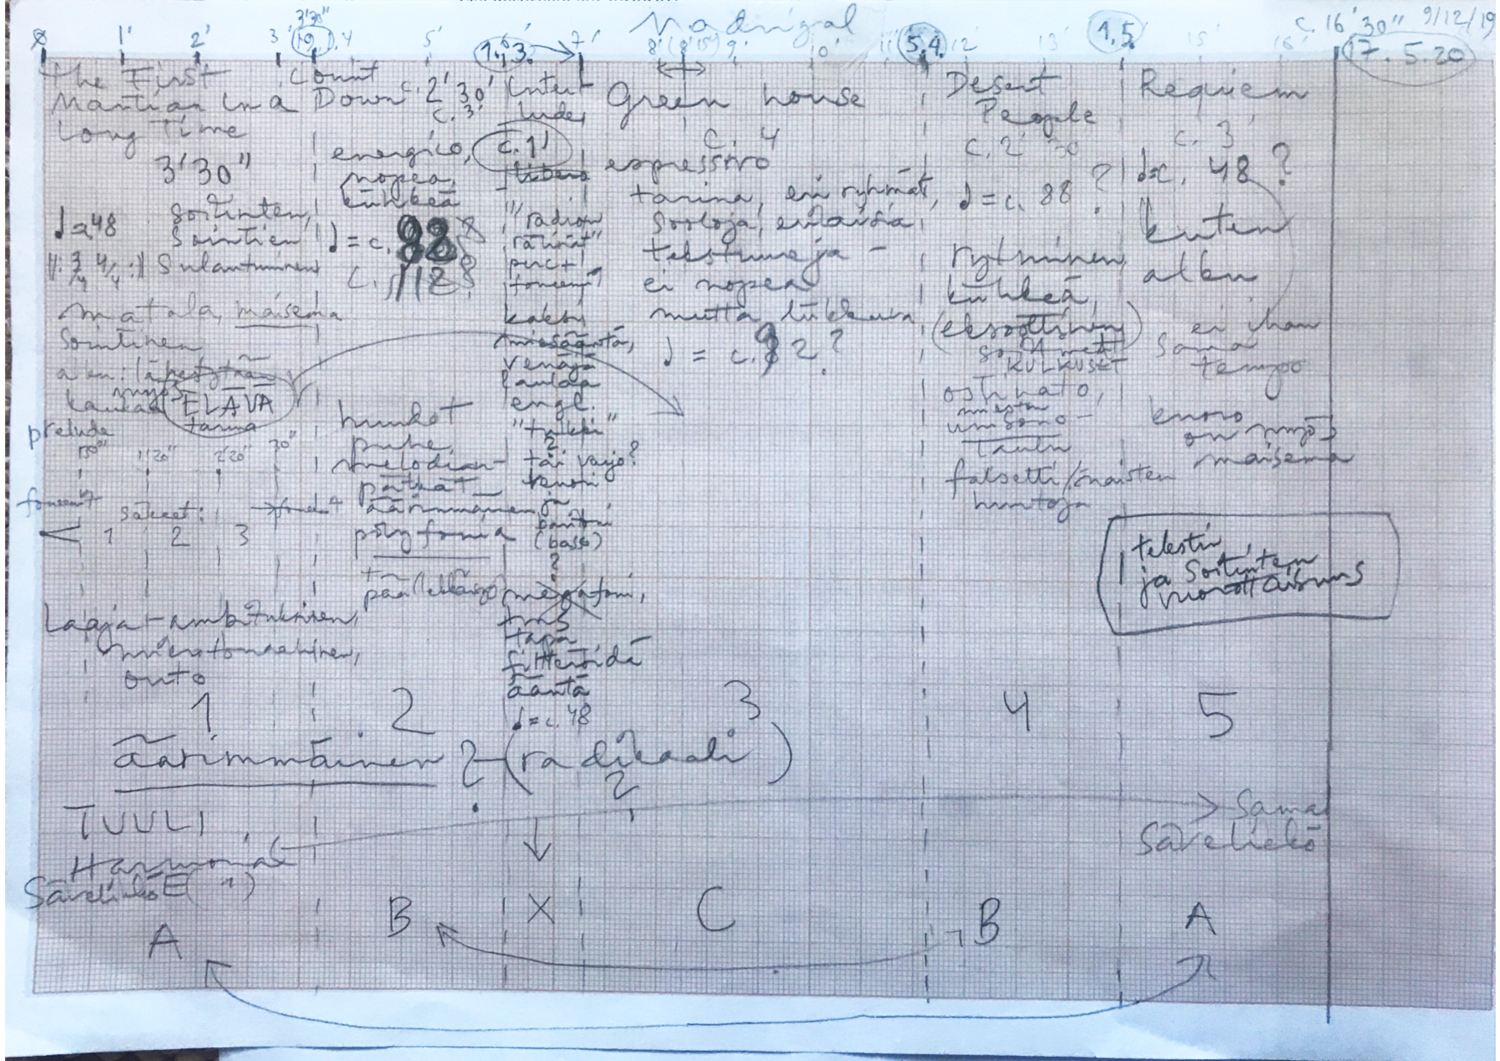 Kaija Saariaho Collection, Paul Sacher Foundation, Basel Sketch for the musical dramaturgy on the composition's timeline